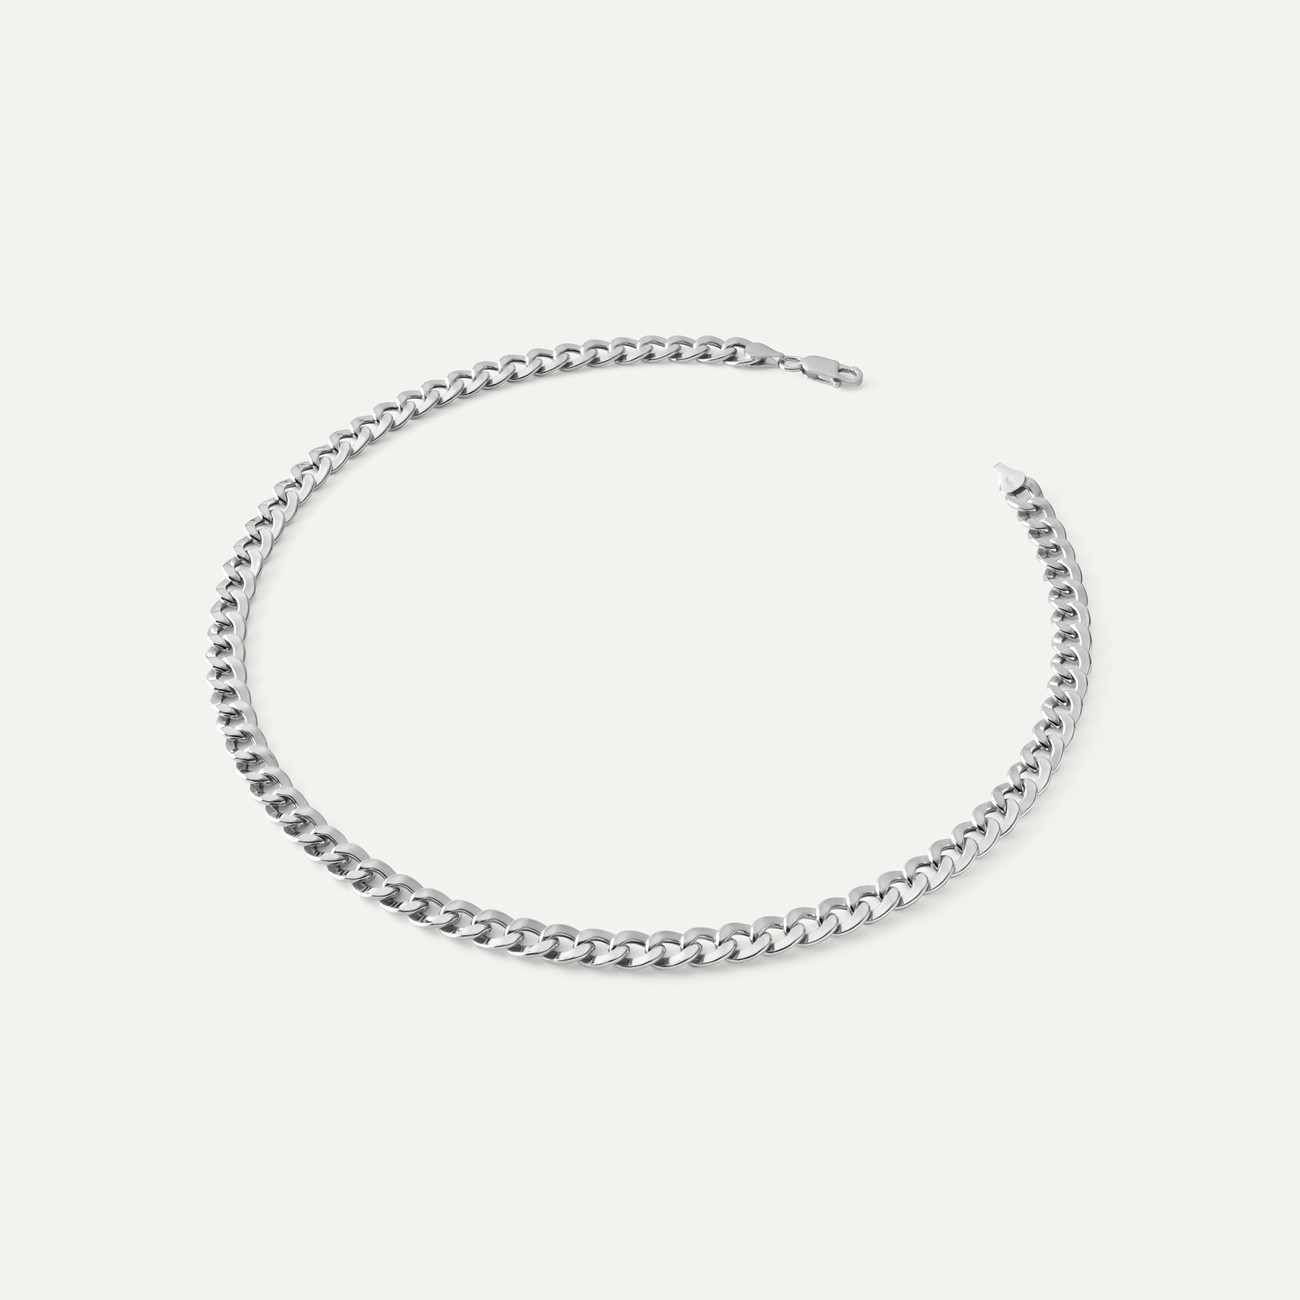 SILVER CHAIN NECKLACE CURB CHOKER 925